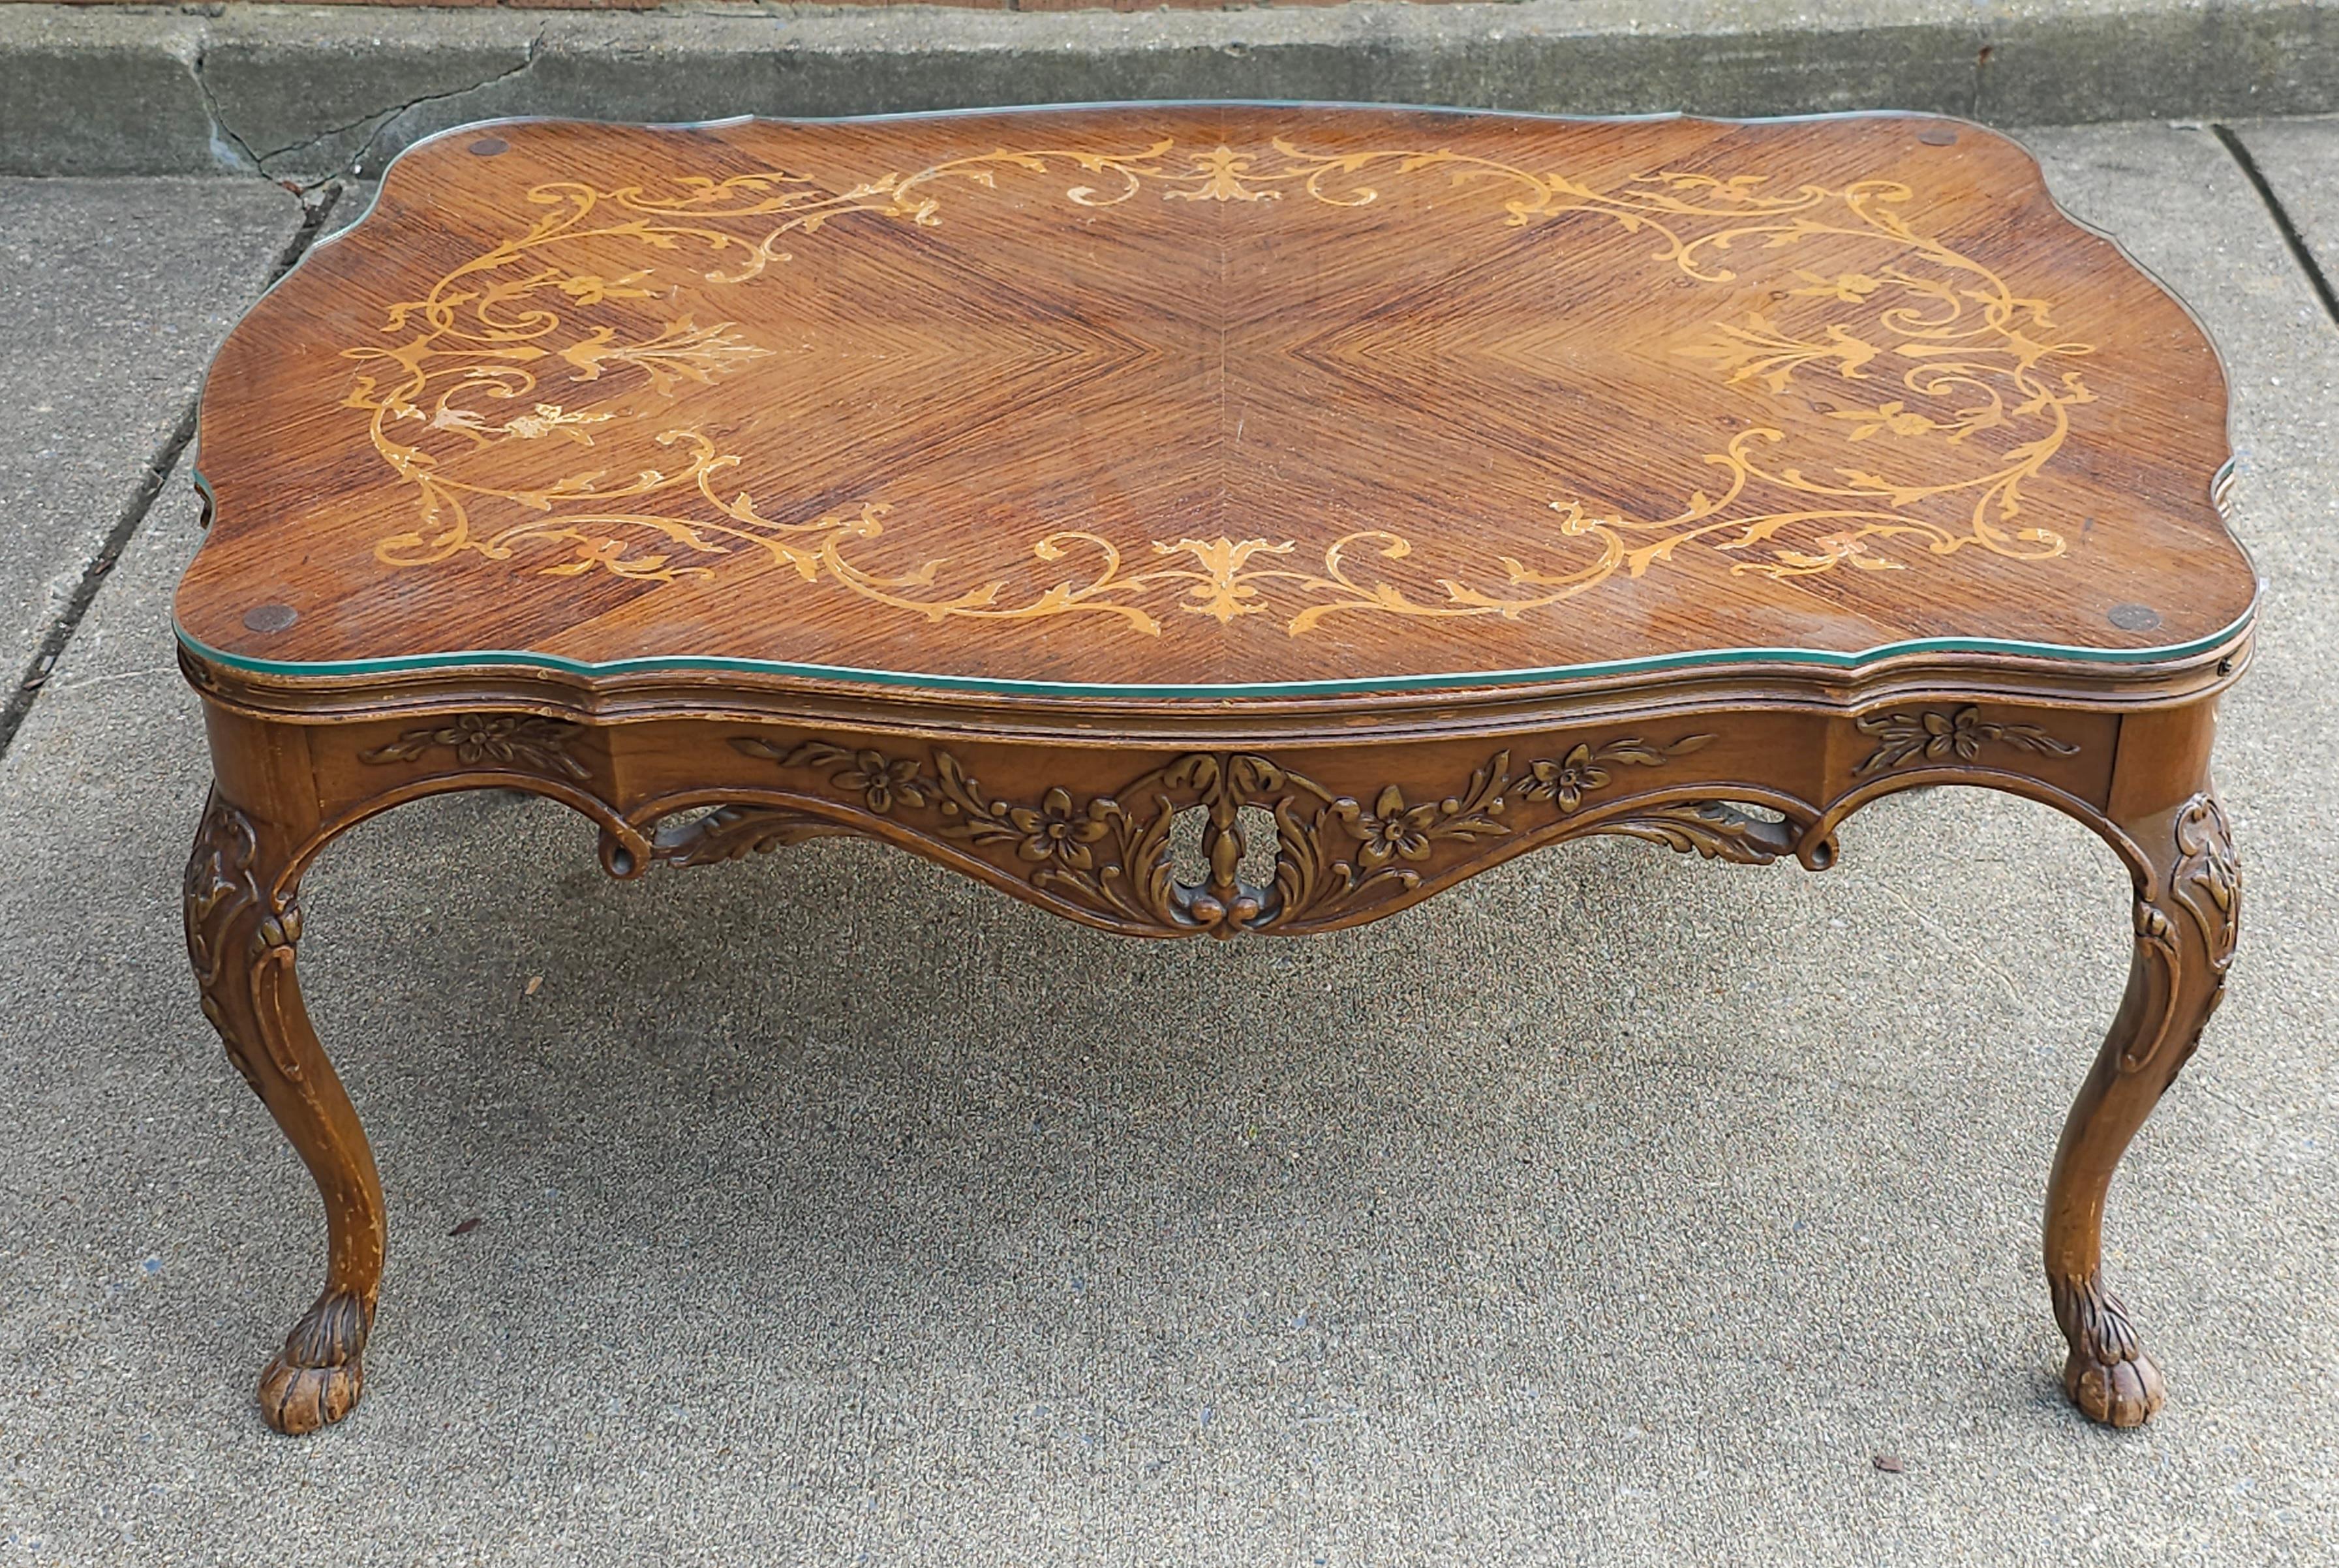 20th Century Edwardian Rococo Style Satinwood Marquetry Cocktail Table with Protective Glass  For Sale